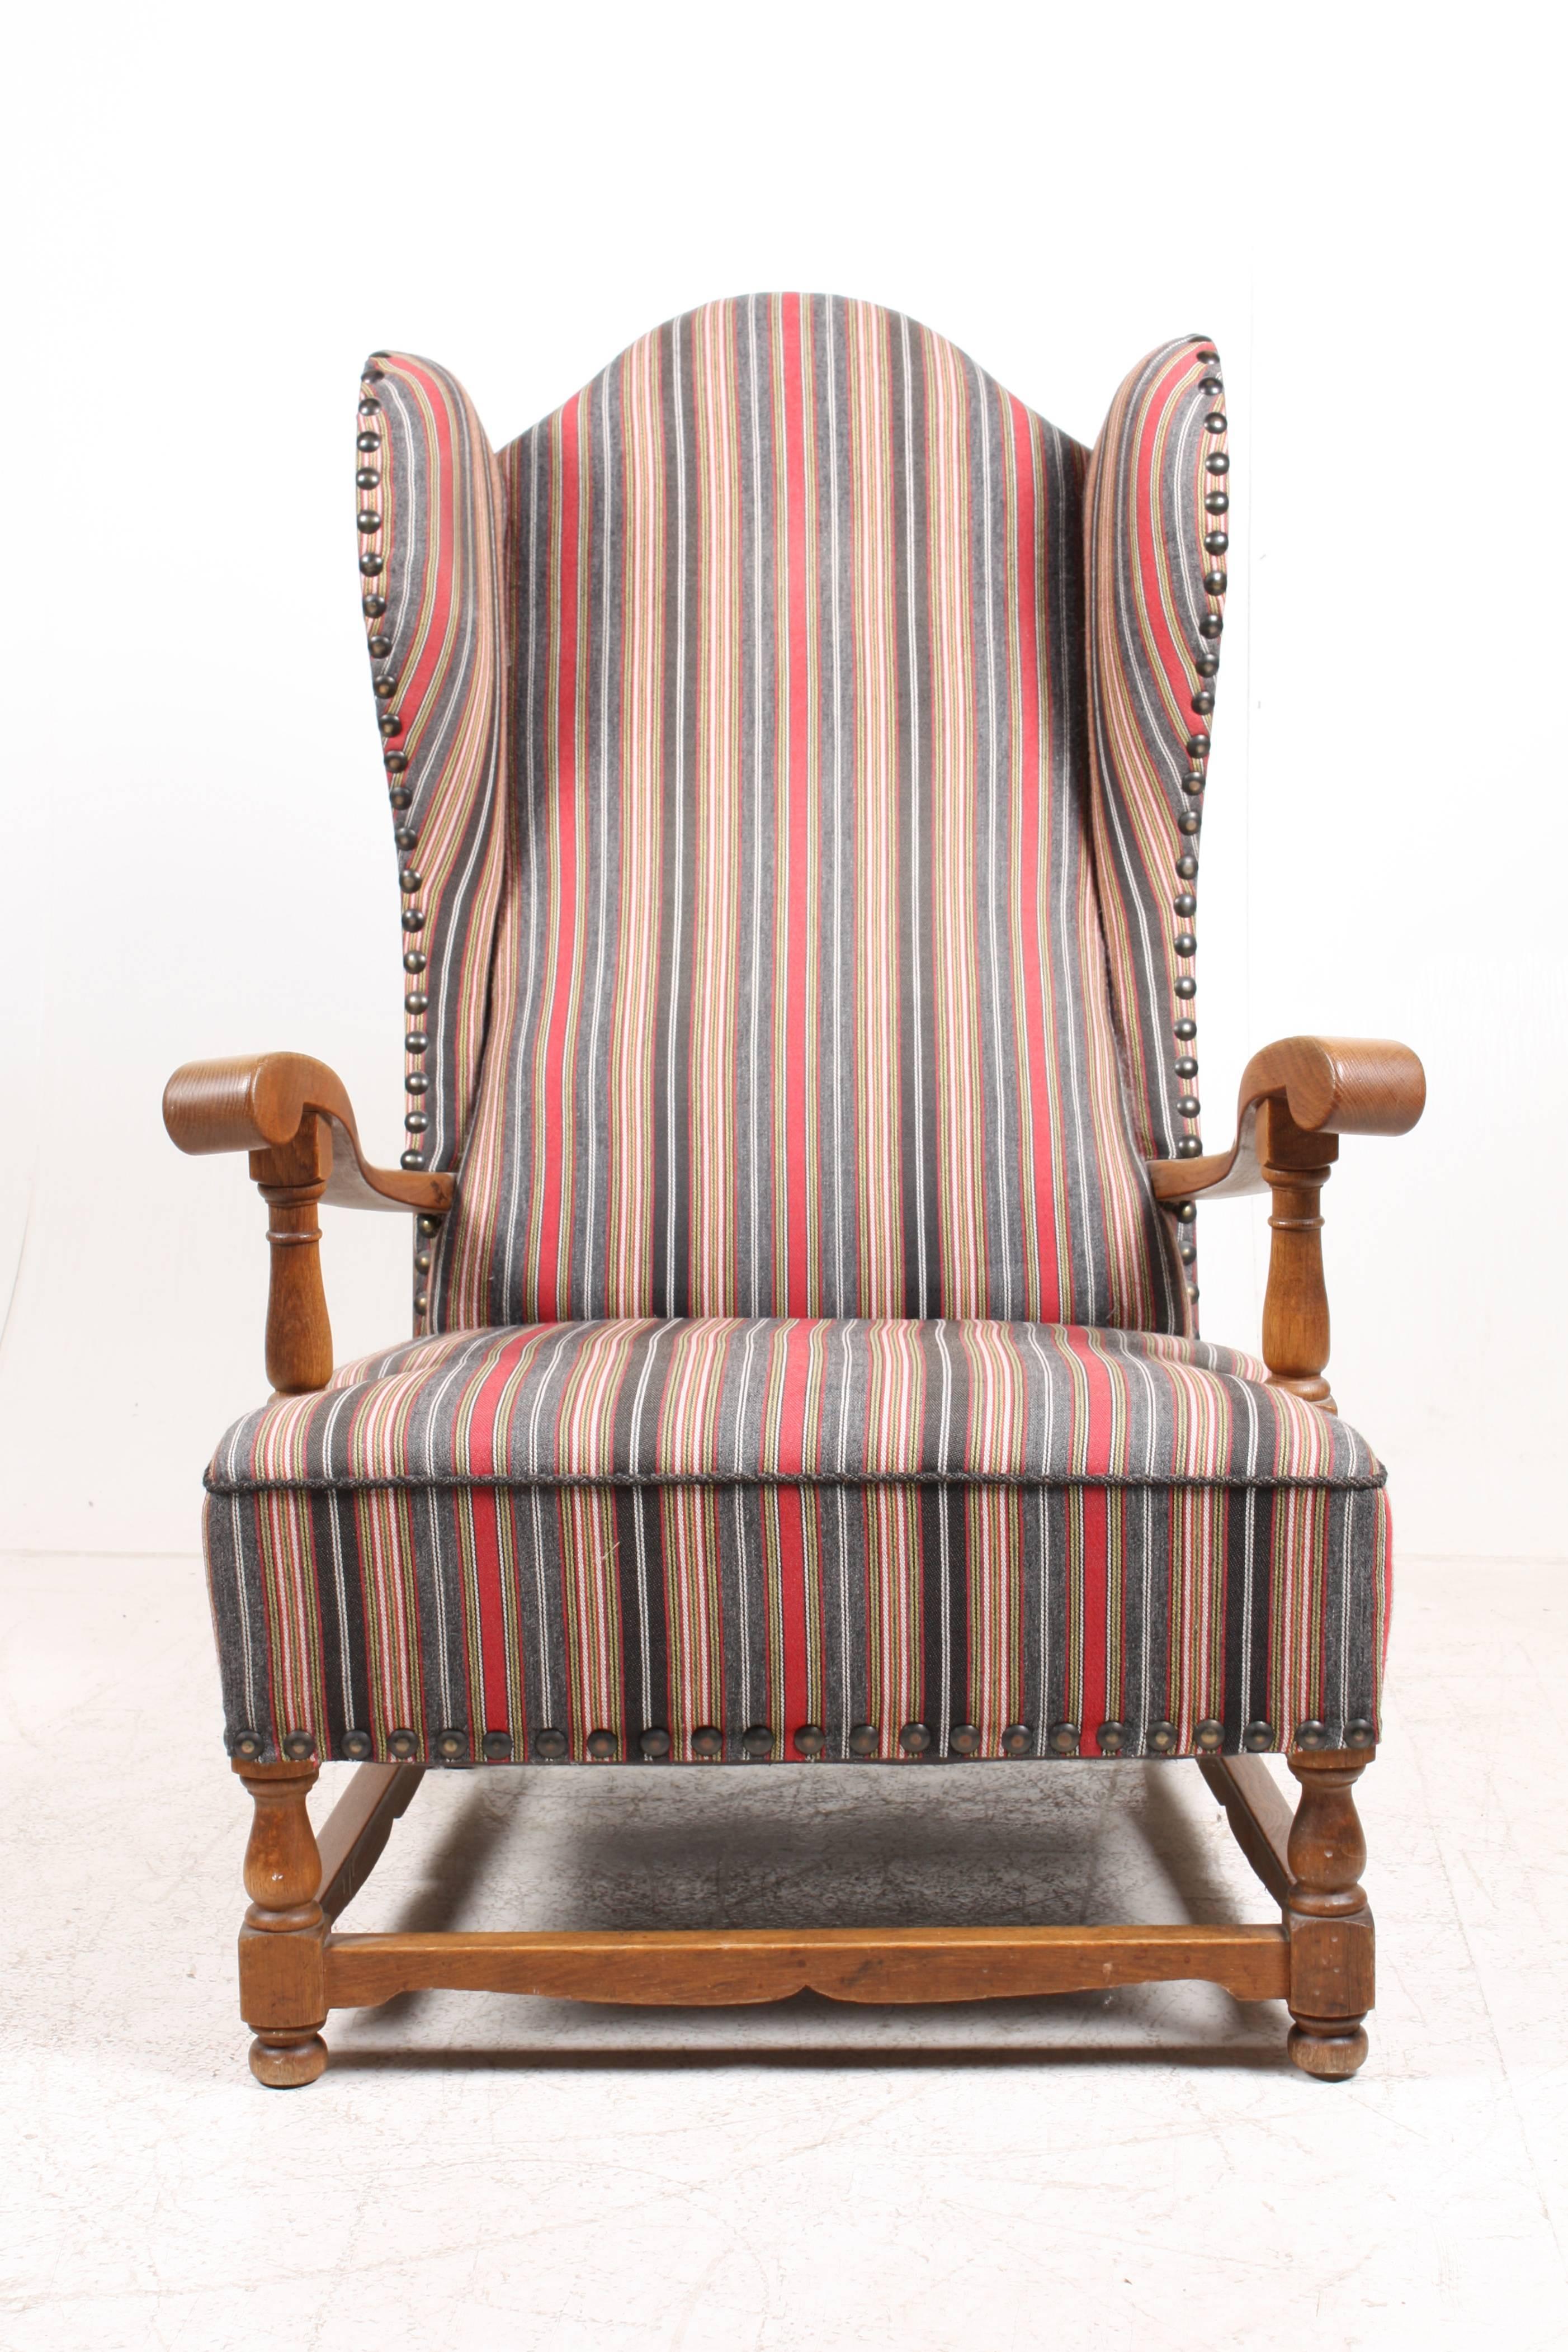 Large oak frame easy chair made in Sweden in the 1940s. Original condition.